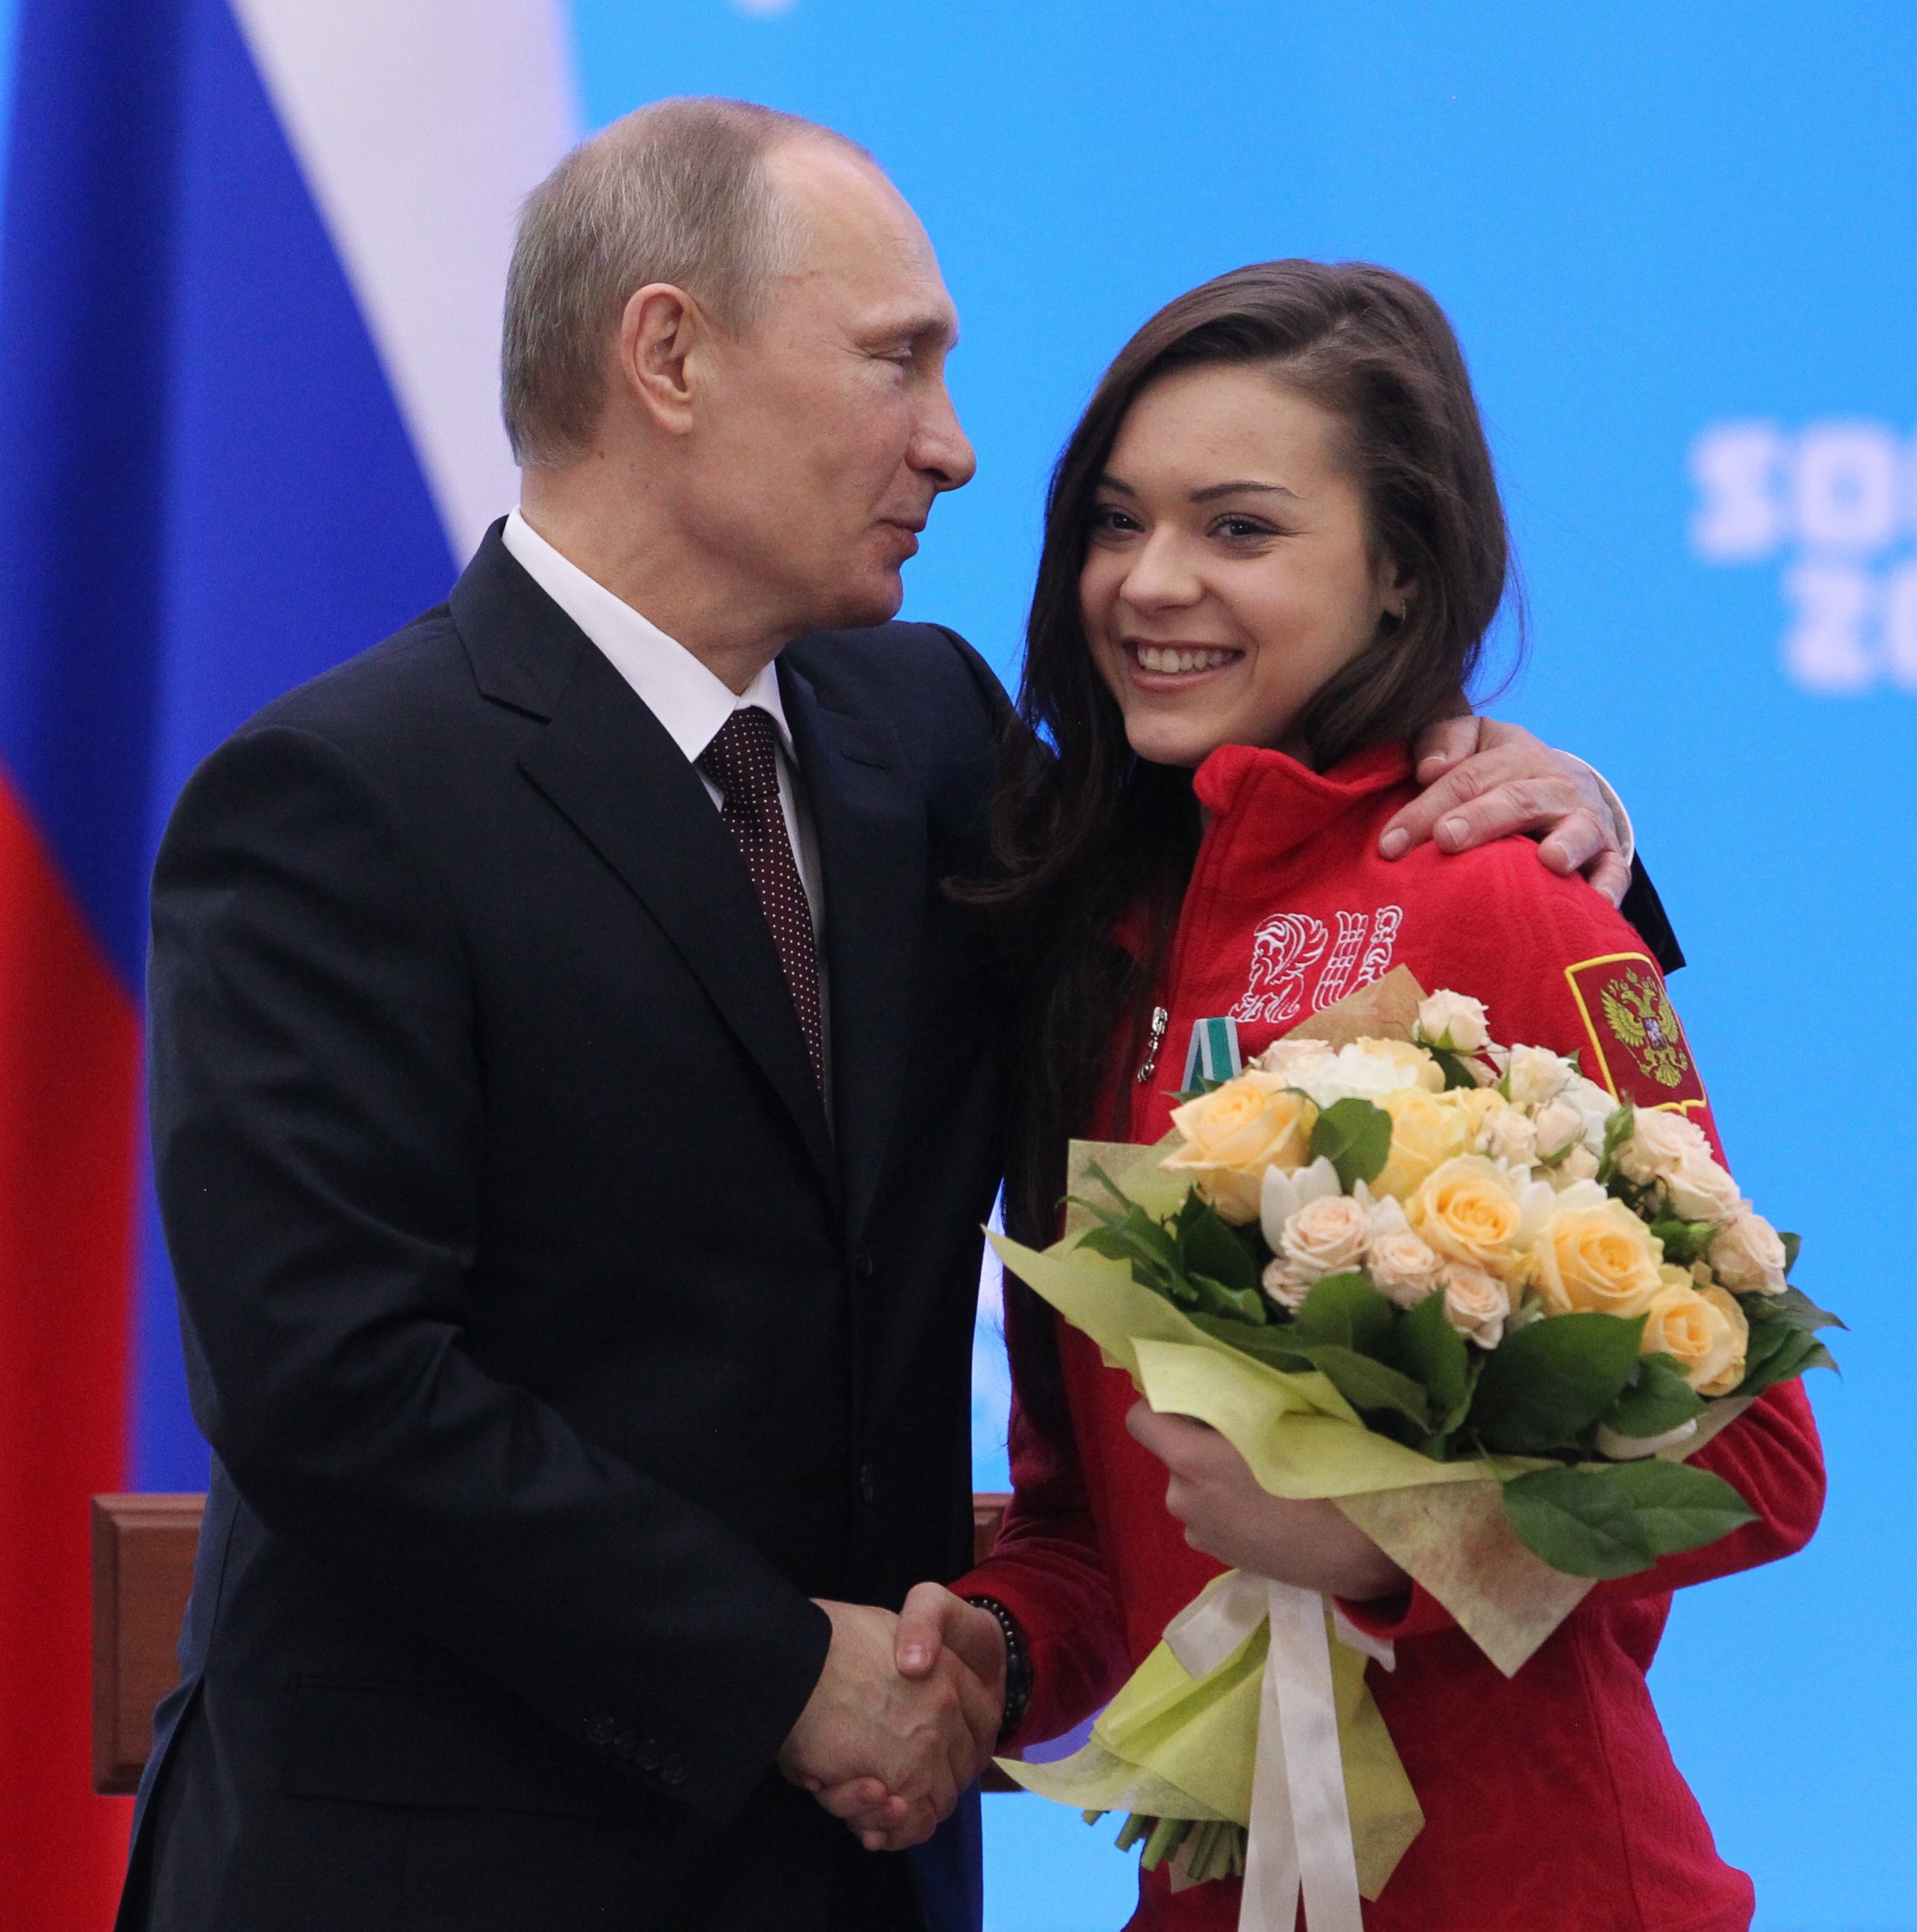 PHOTO: Russian President Vladimir Putin shakes hands with Olympic gold medalist in figure skating, Adelina Sotnikova, during an awards ceremony for Russian Olympic athletes on Feb. 24, 2014 in Sochi, Russia.